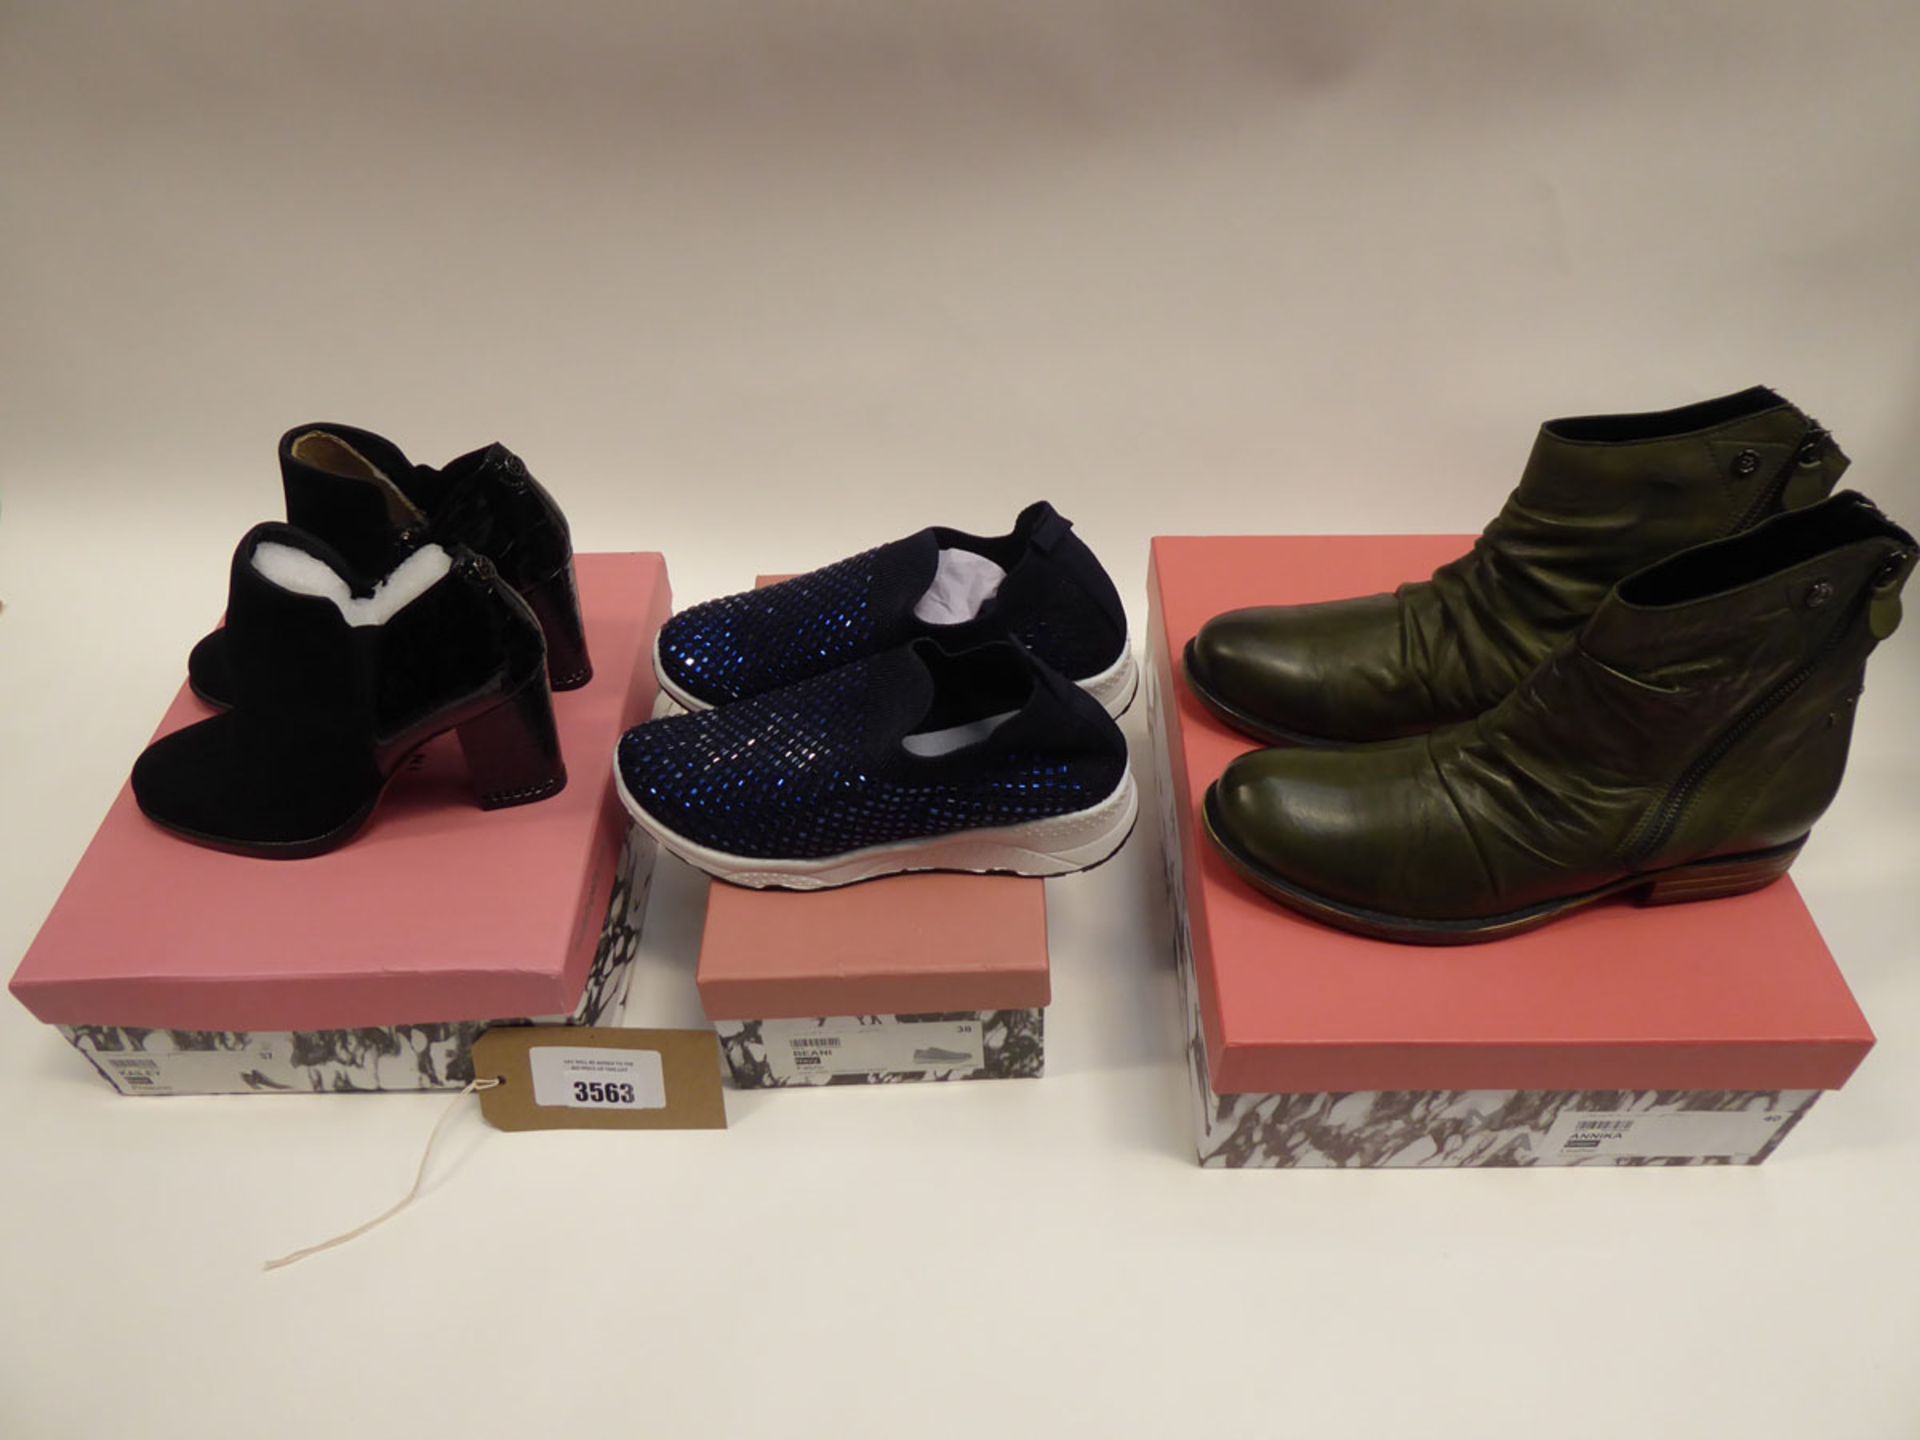 3 pairs of Moda in Pelle shoes to include Kailey ankle boots sized EU 37, Beani trainers size EU